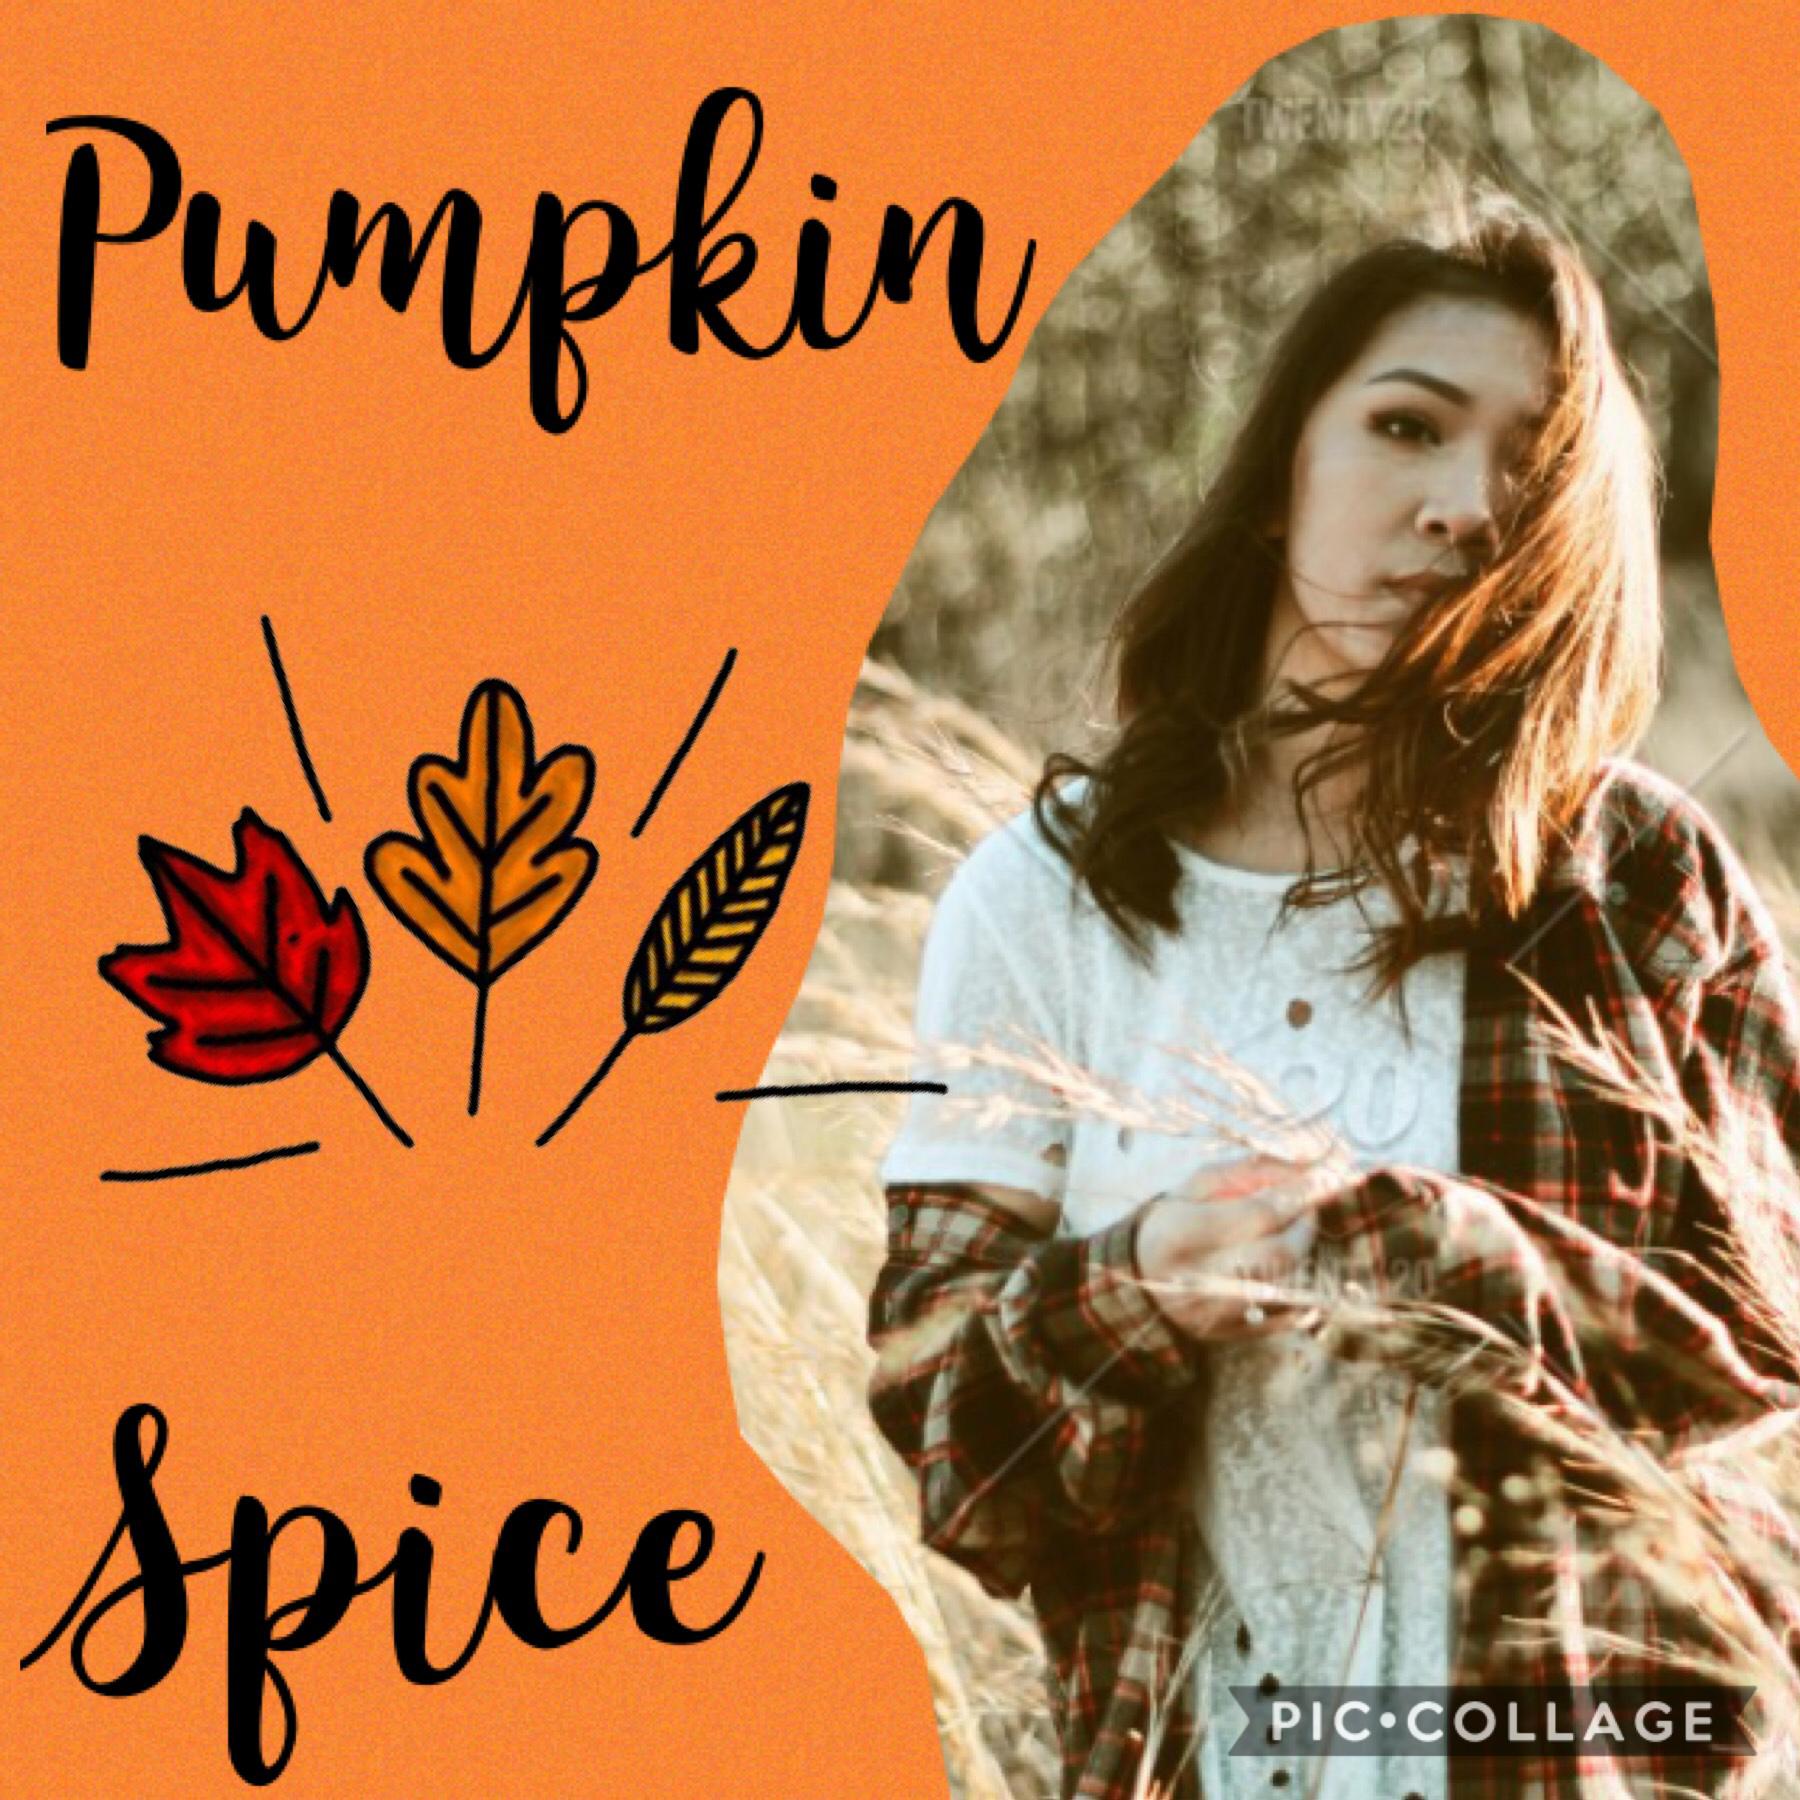 Pumpkin spice for life 🍂